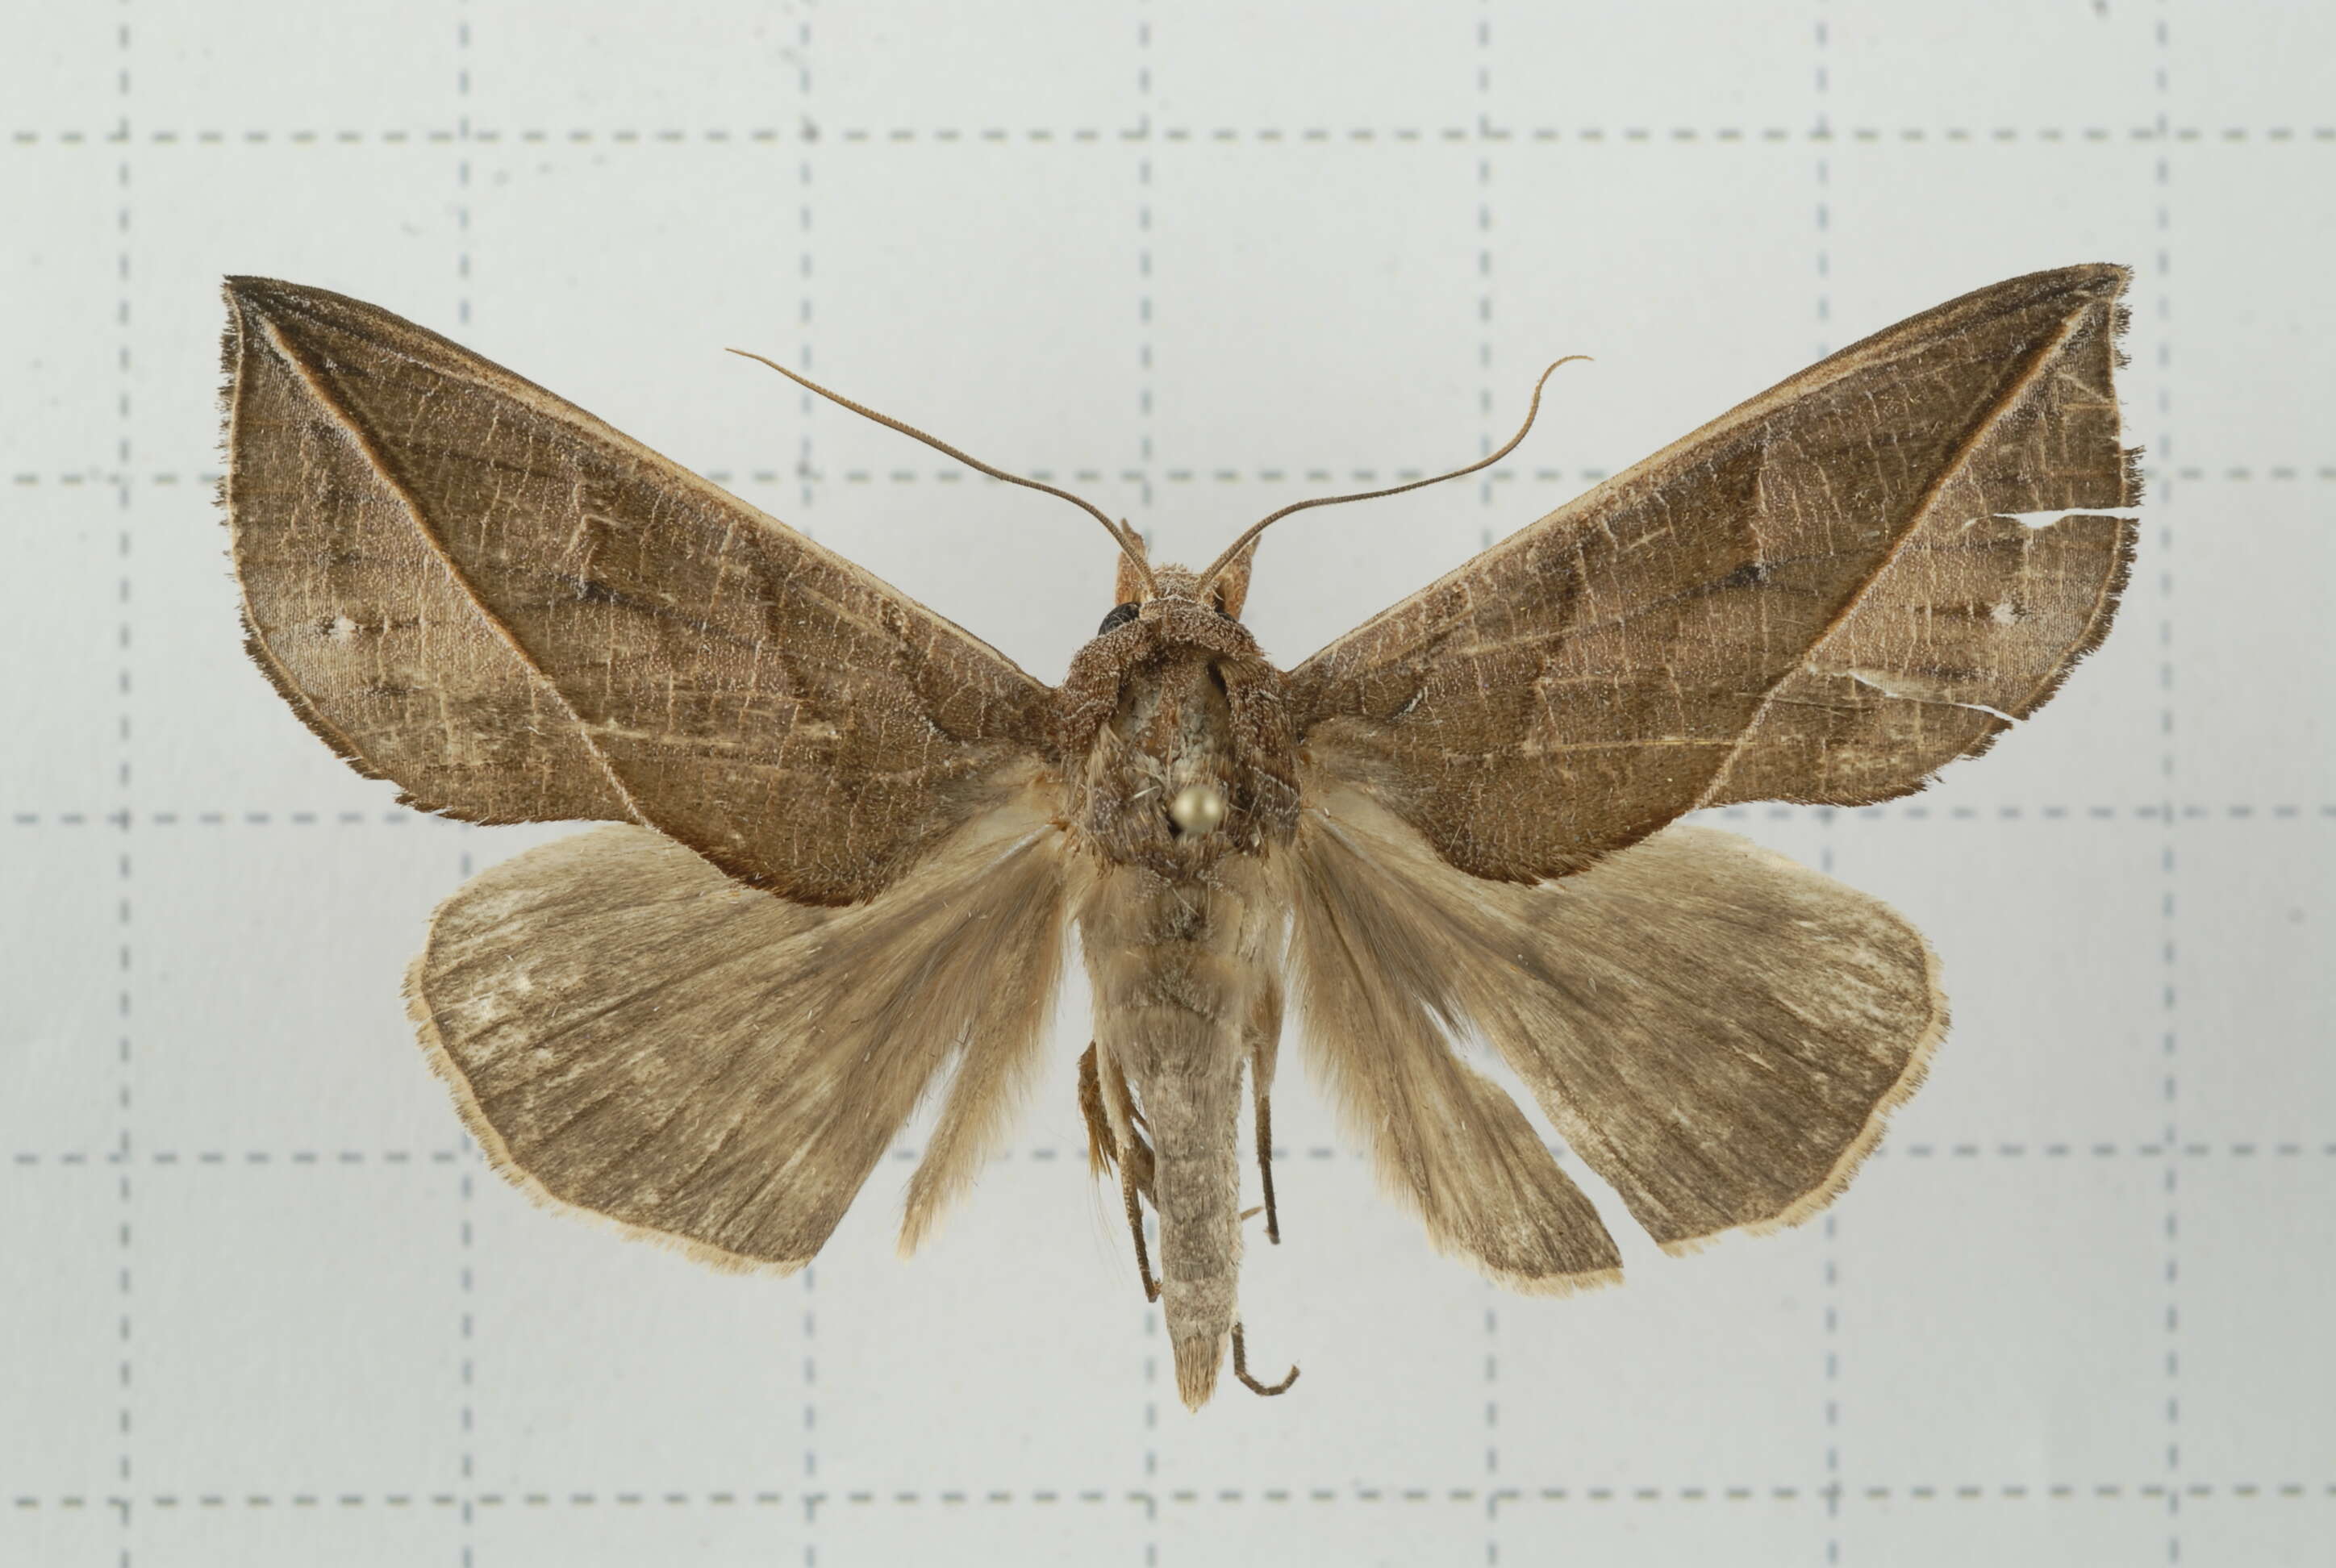 Image of Calyptra orthograpta Butler 1886